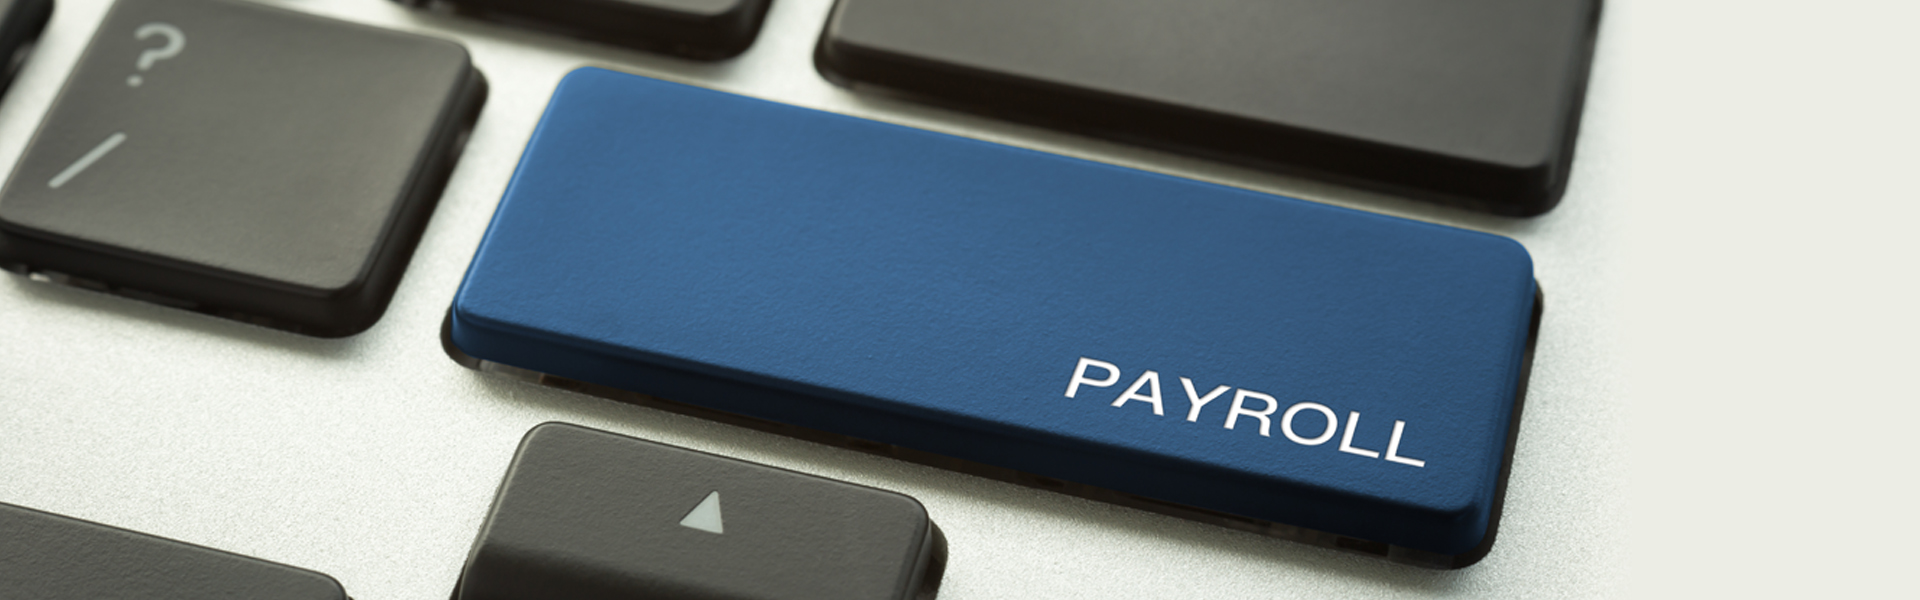 Learn how to effectively manage payroll with these 8 tips!